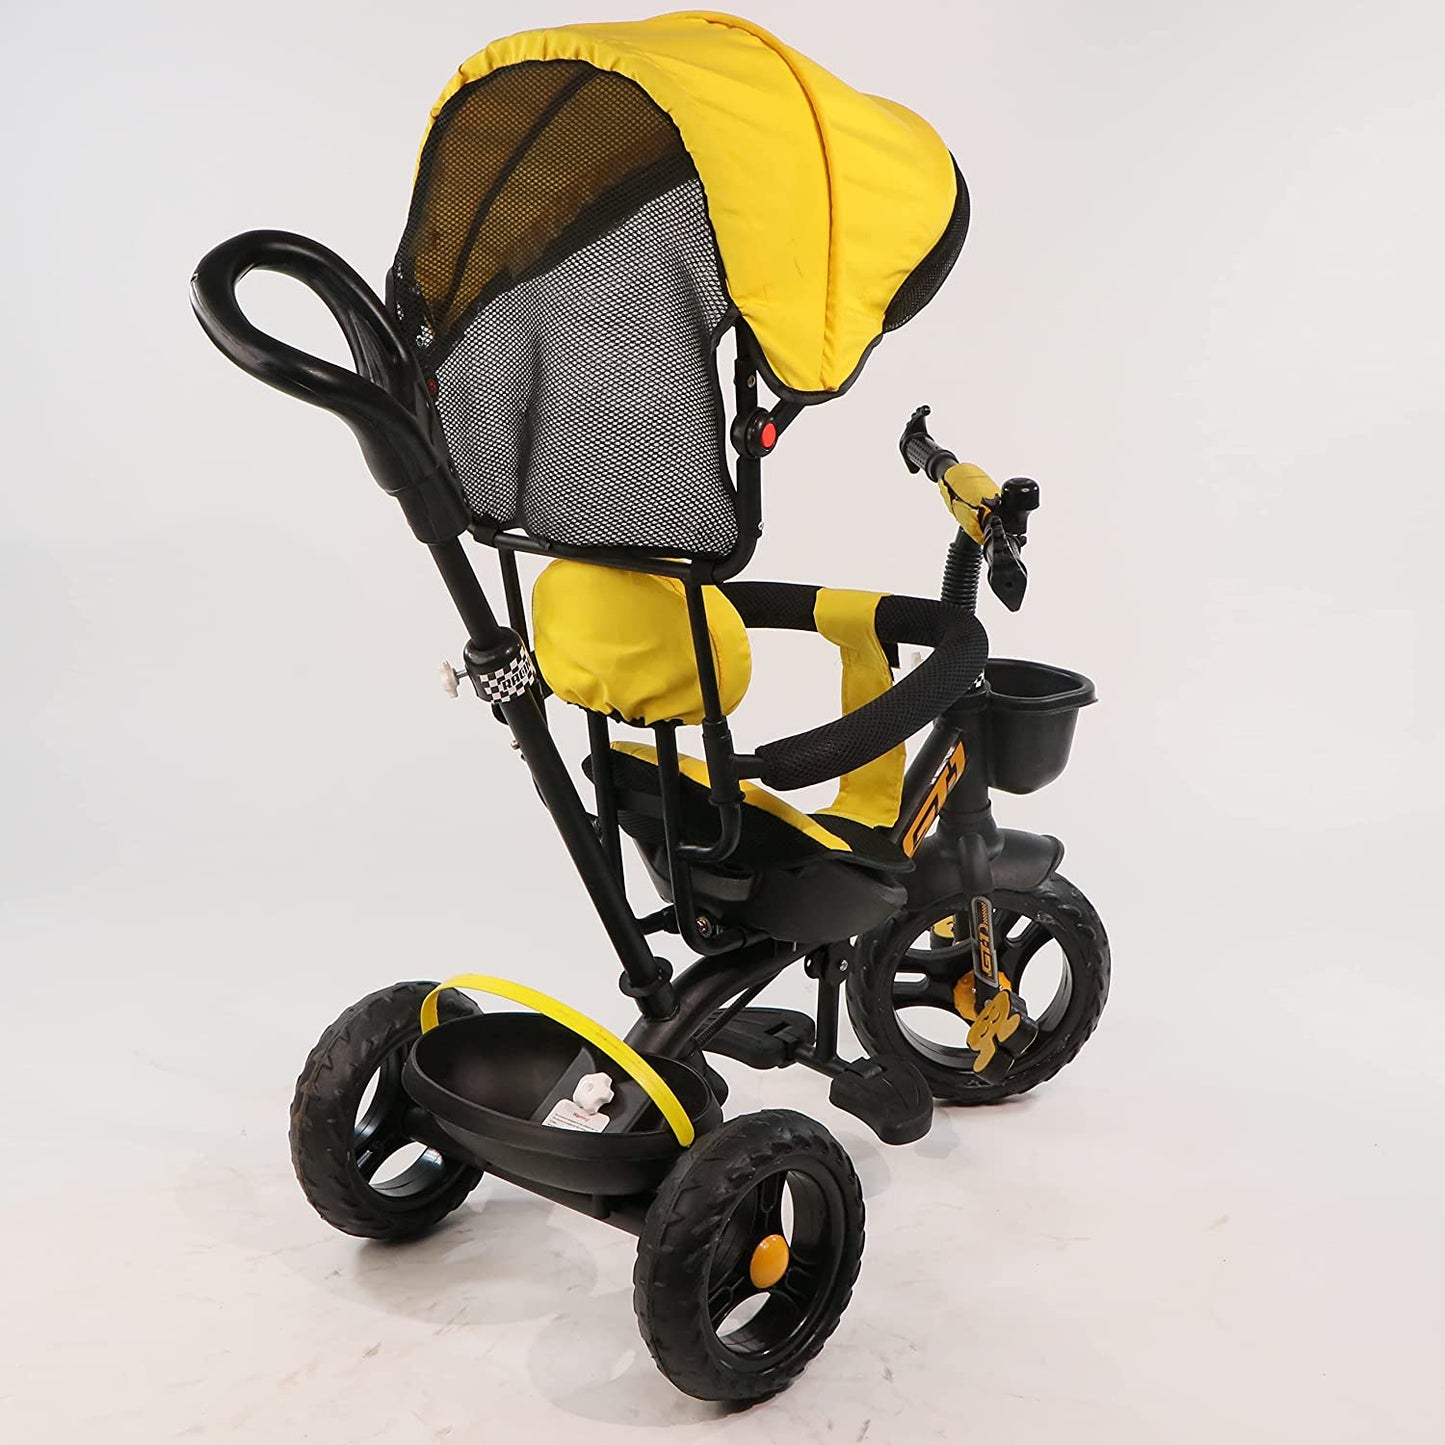 Luusa GT500 Hooded Tricycle Plug N Play Kids / Baby Tricycle with Parental Control (Yellow)